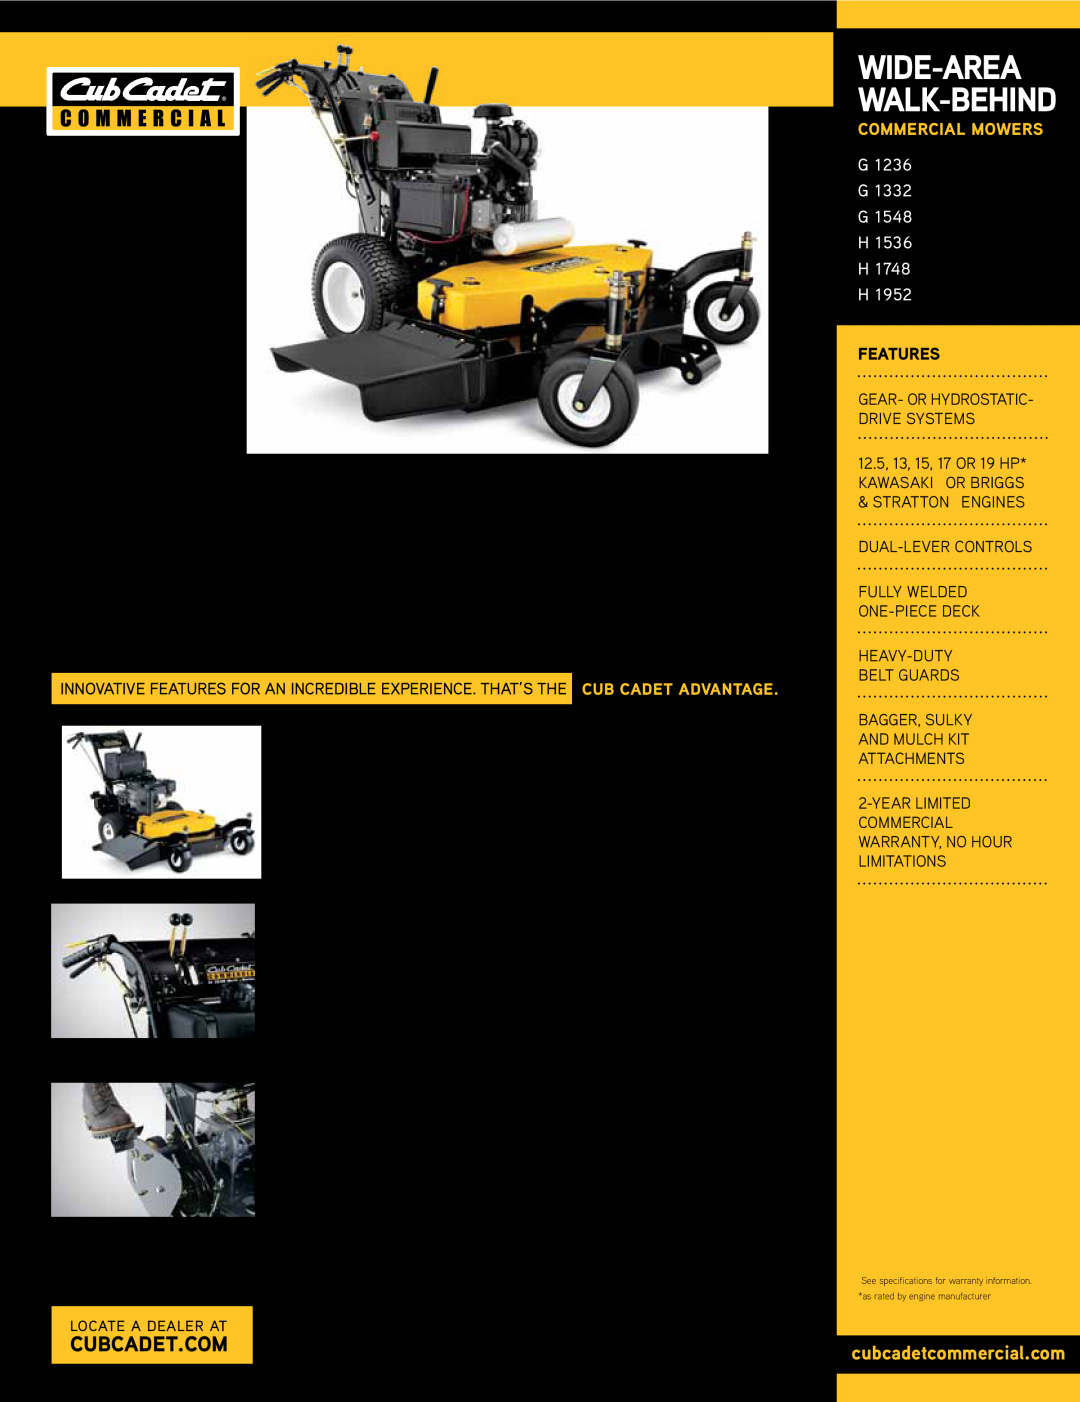 Cub Cadet G 1332 warranty Commercial Mowers, Features, cubcadetcommercial.com, better results anywhere, Cubcadet.Com 